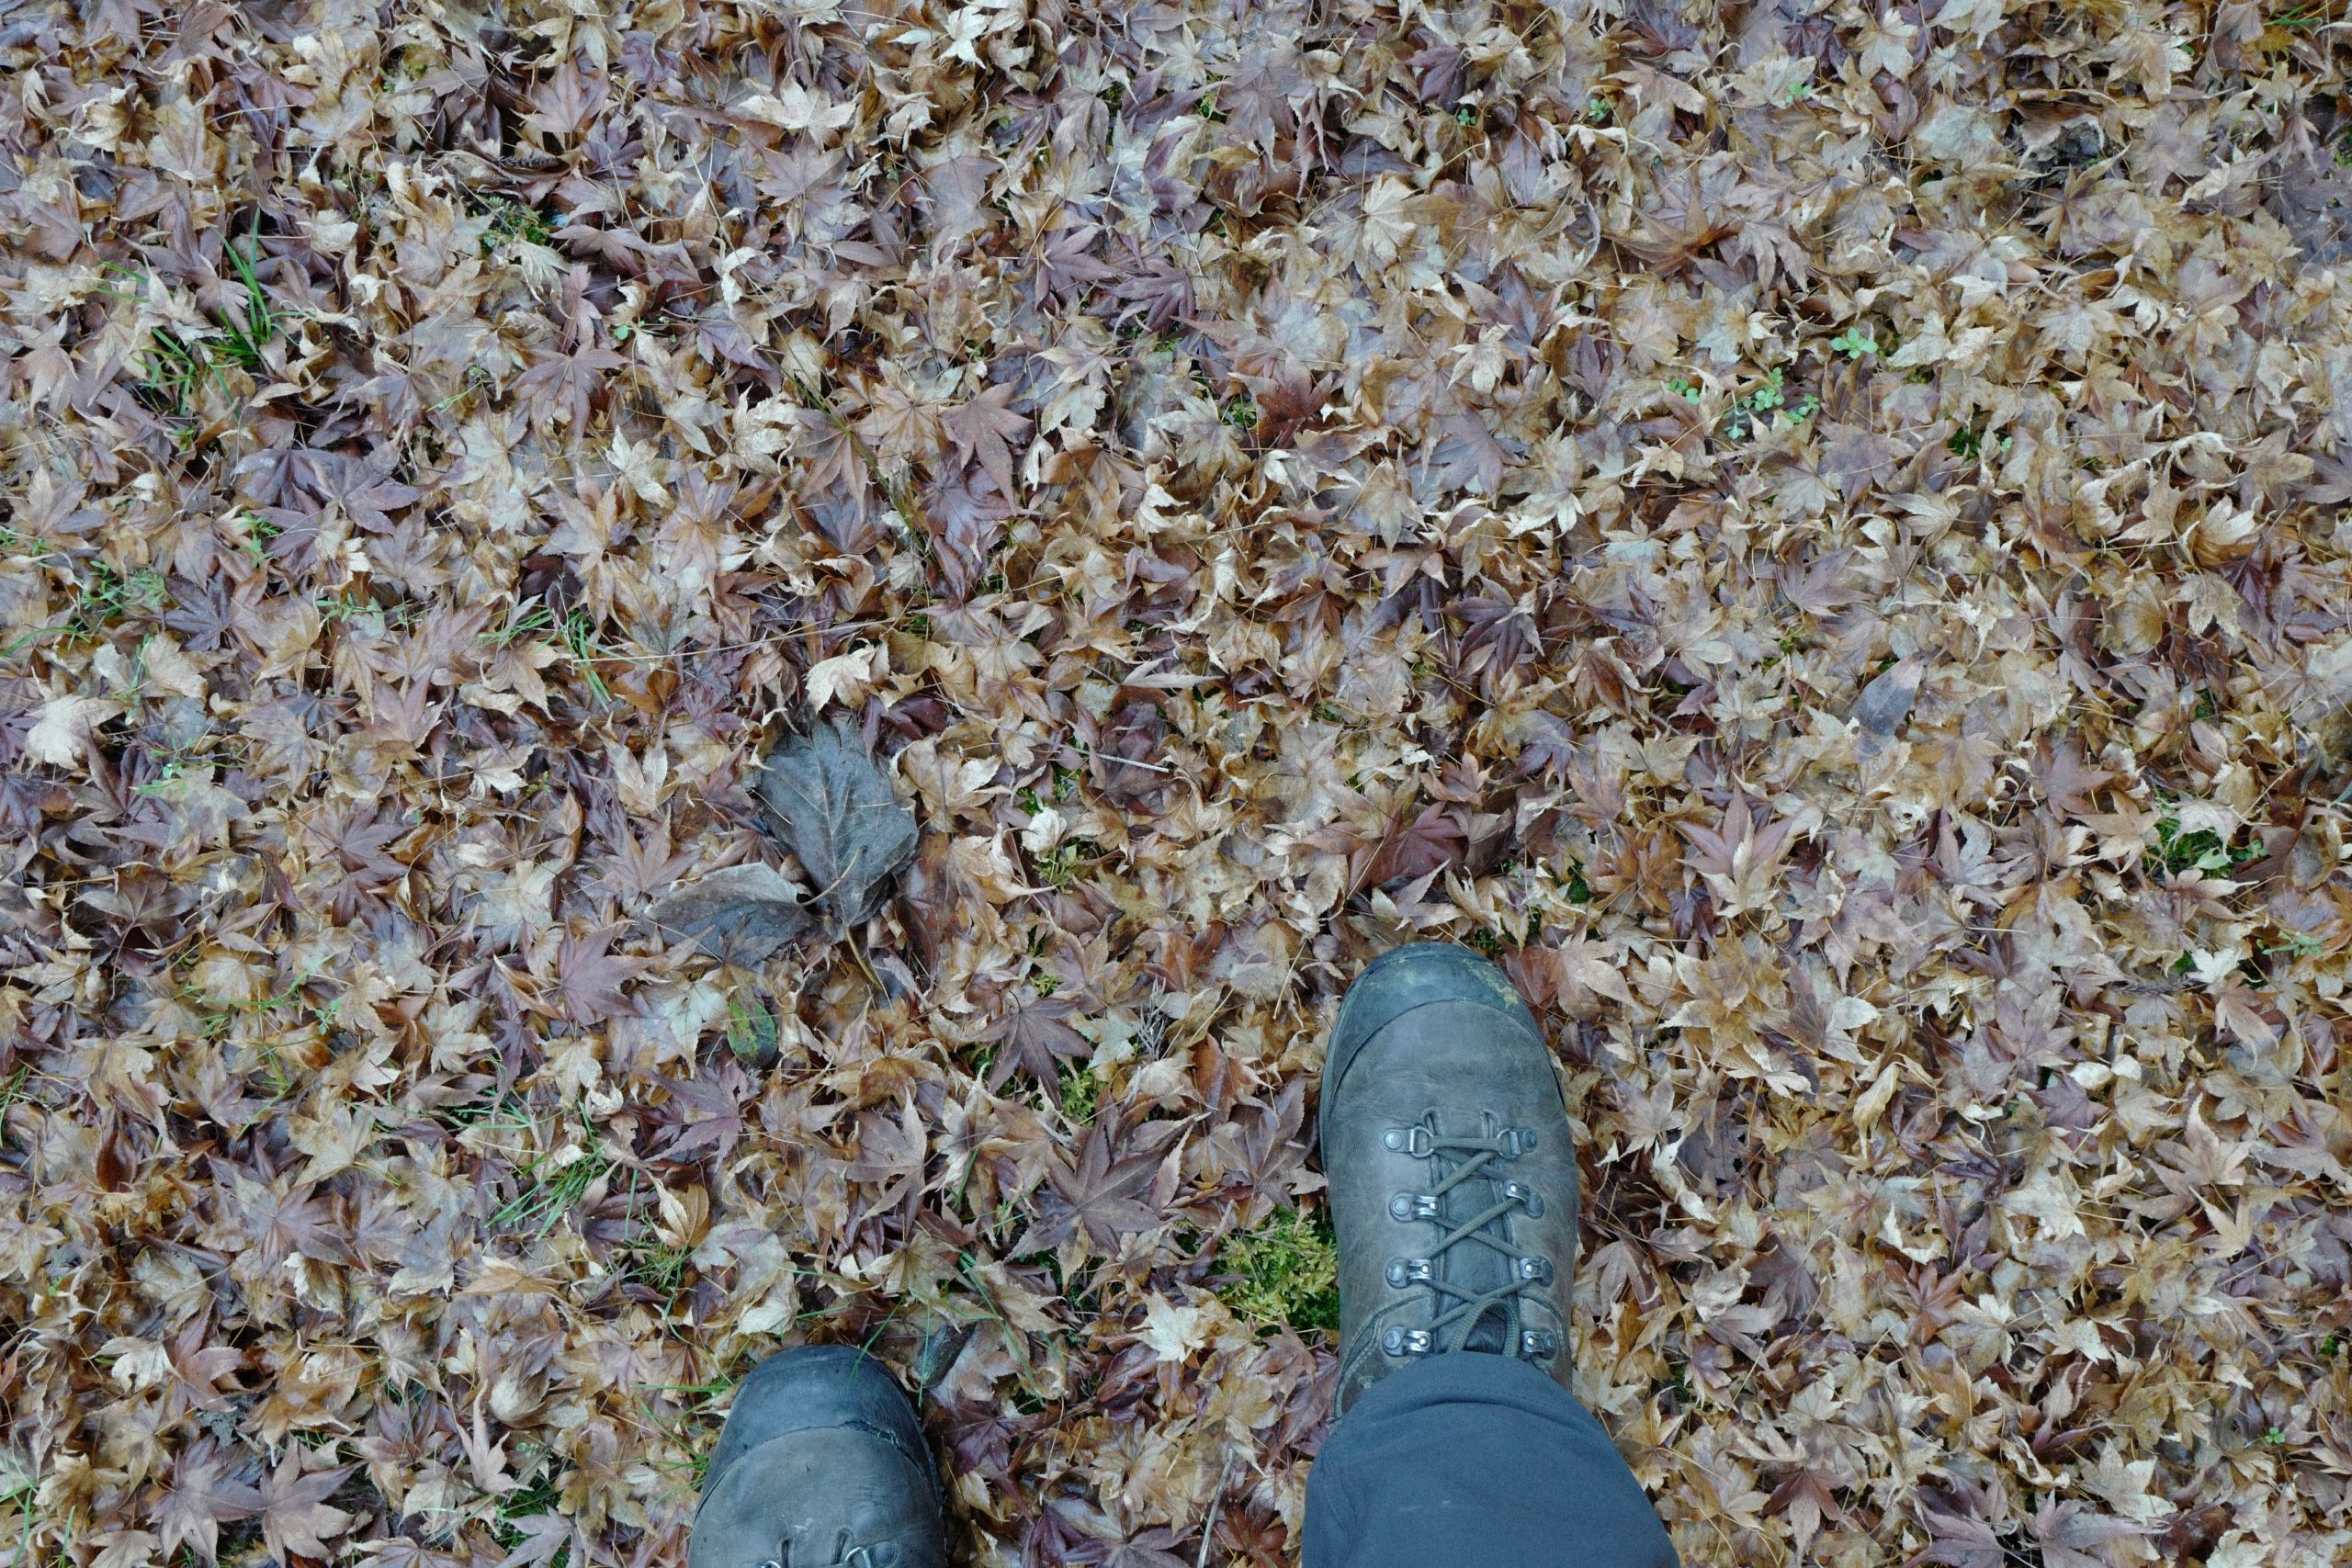 Looking down on a pair of leather hiking boots standing on a carpet of leaves left from autumn.